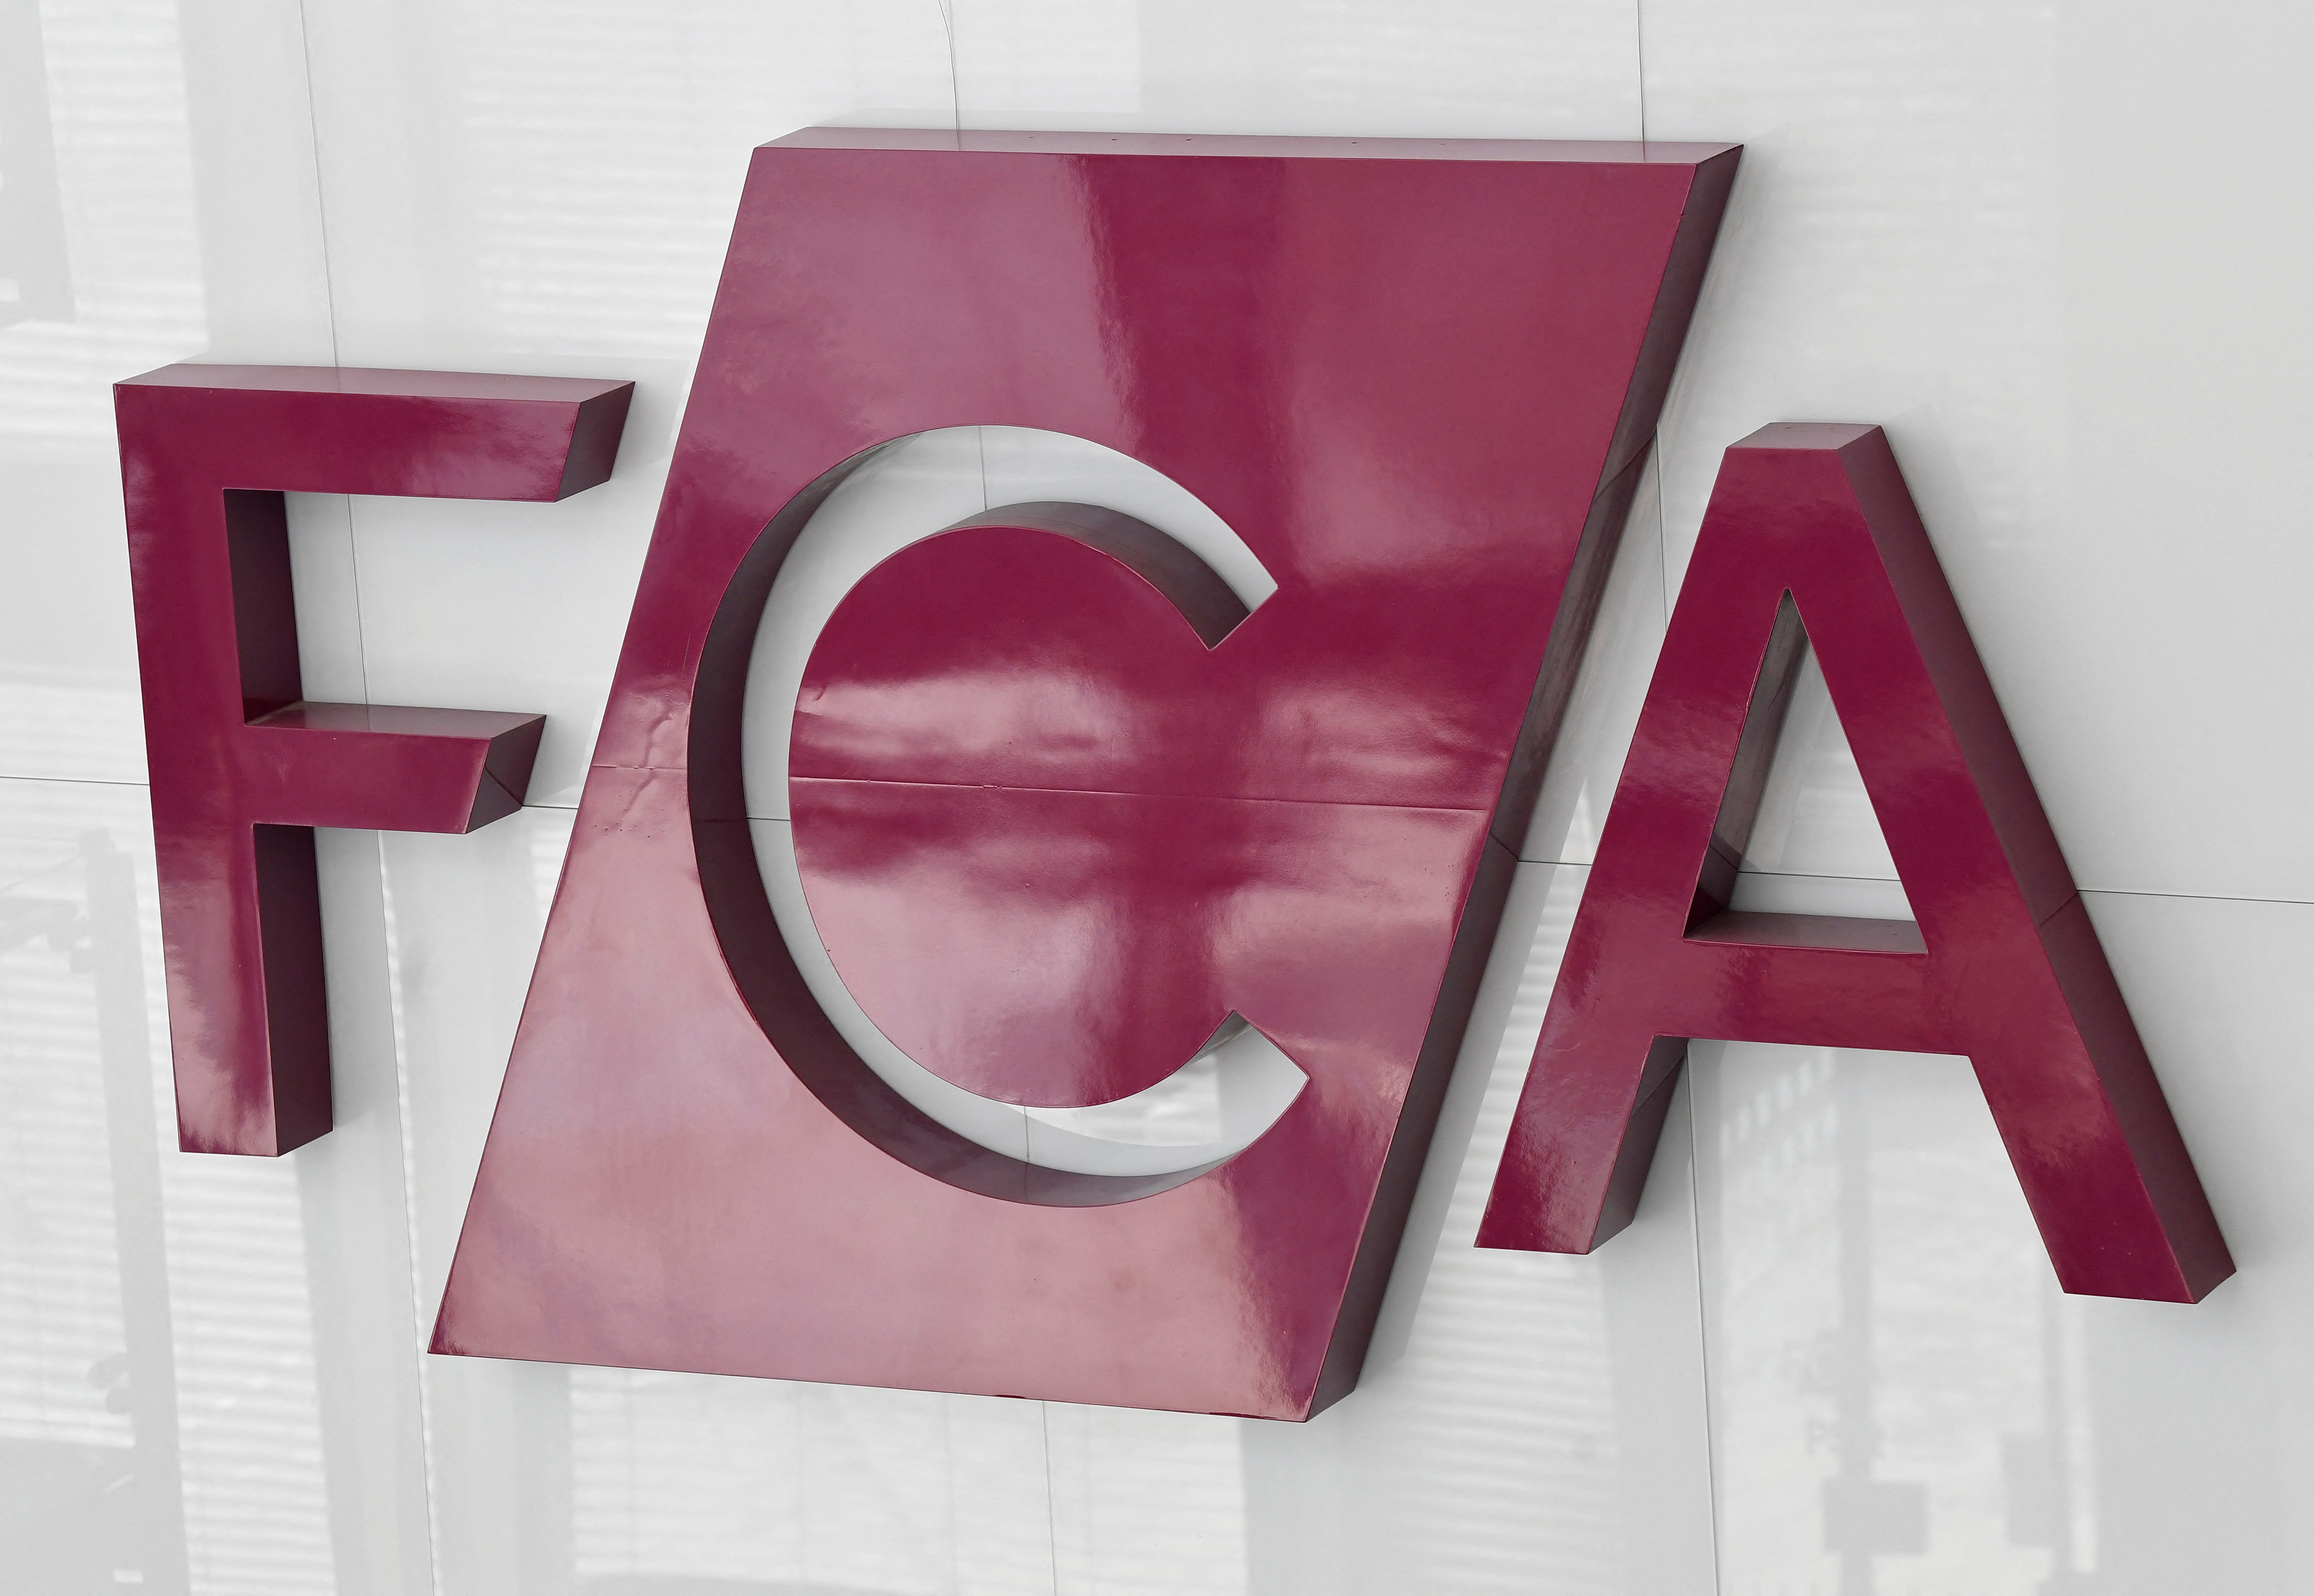 FCA signage seen at their head offices in London